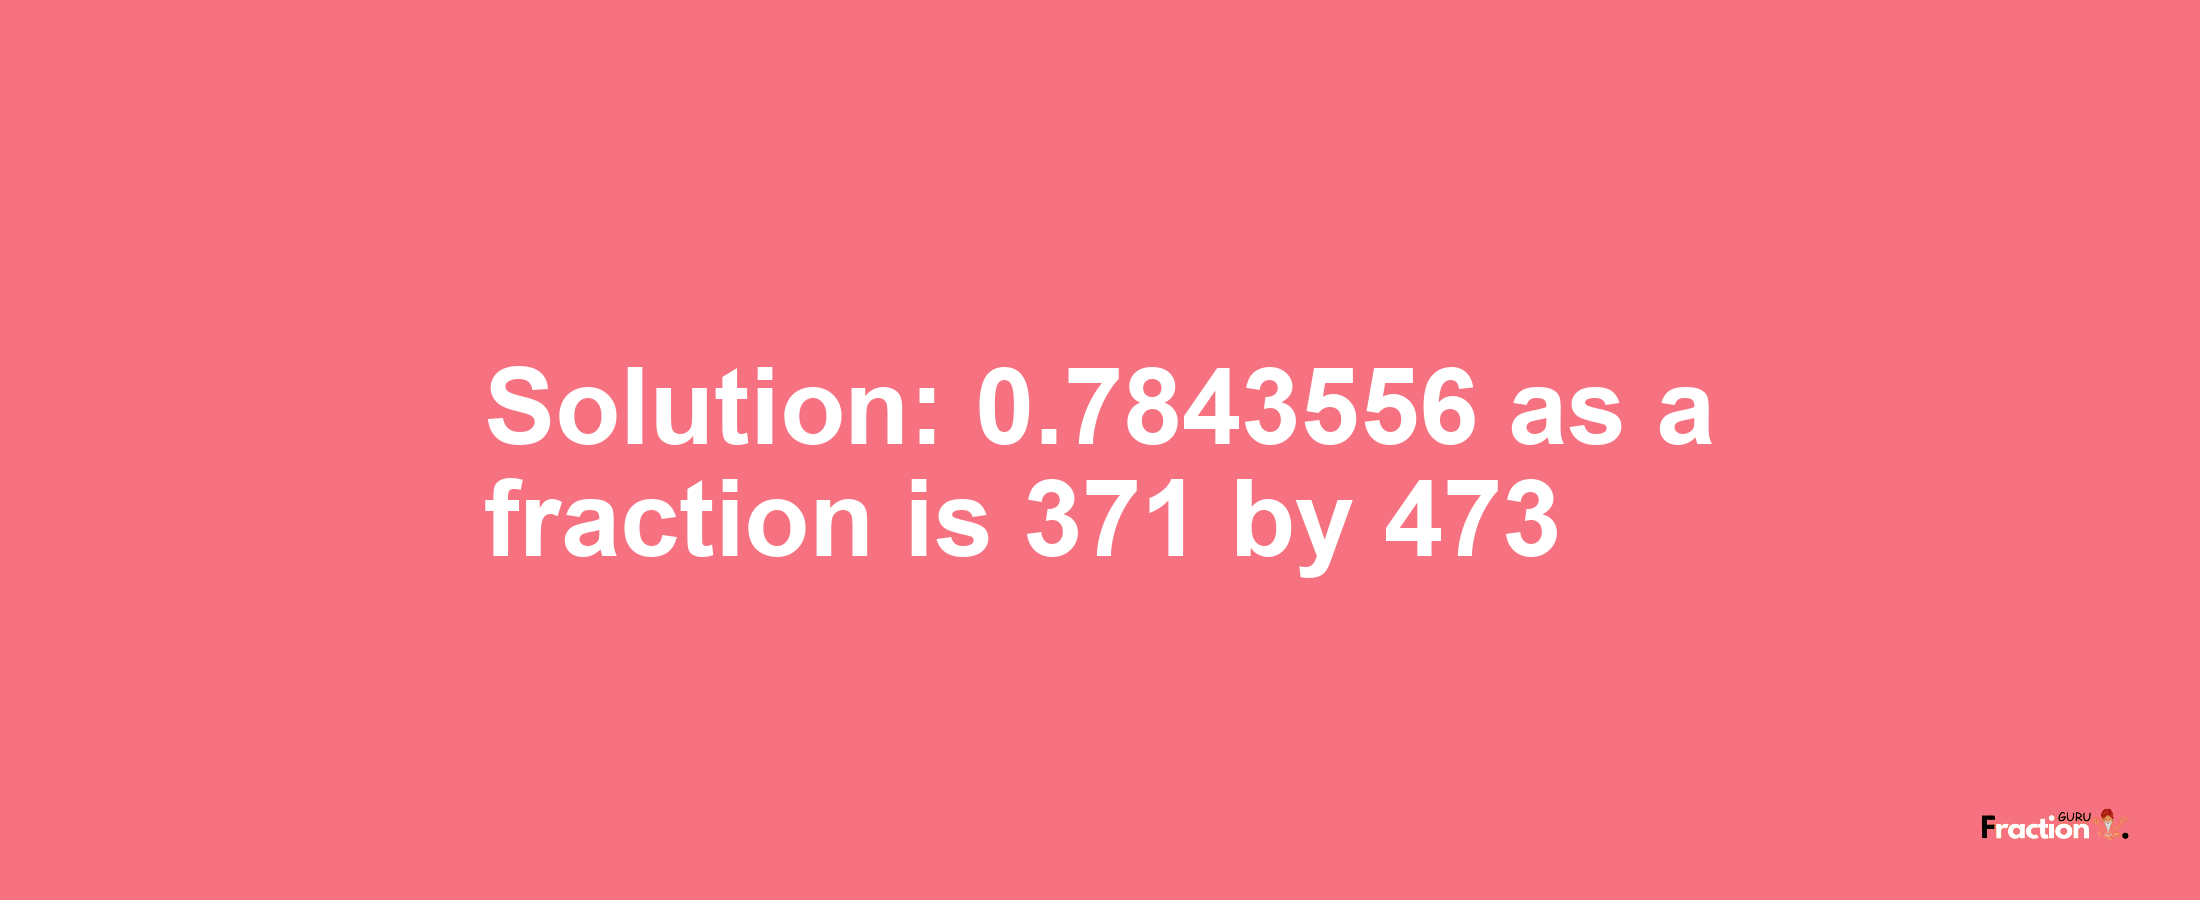 Solution:0.7843556 as a fraction is 371/473